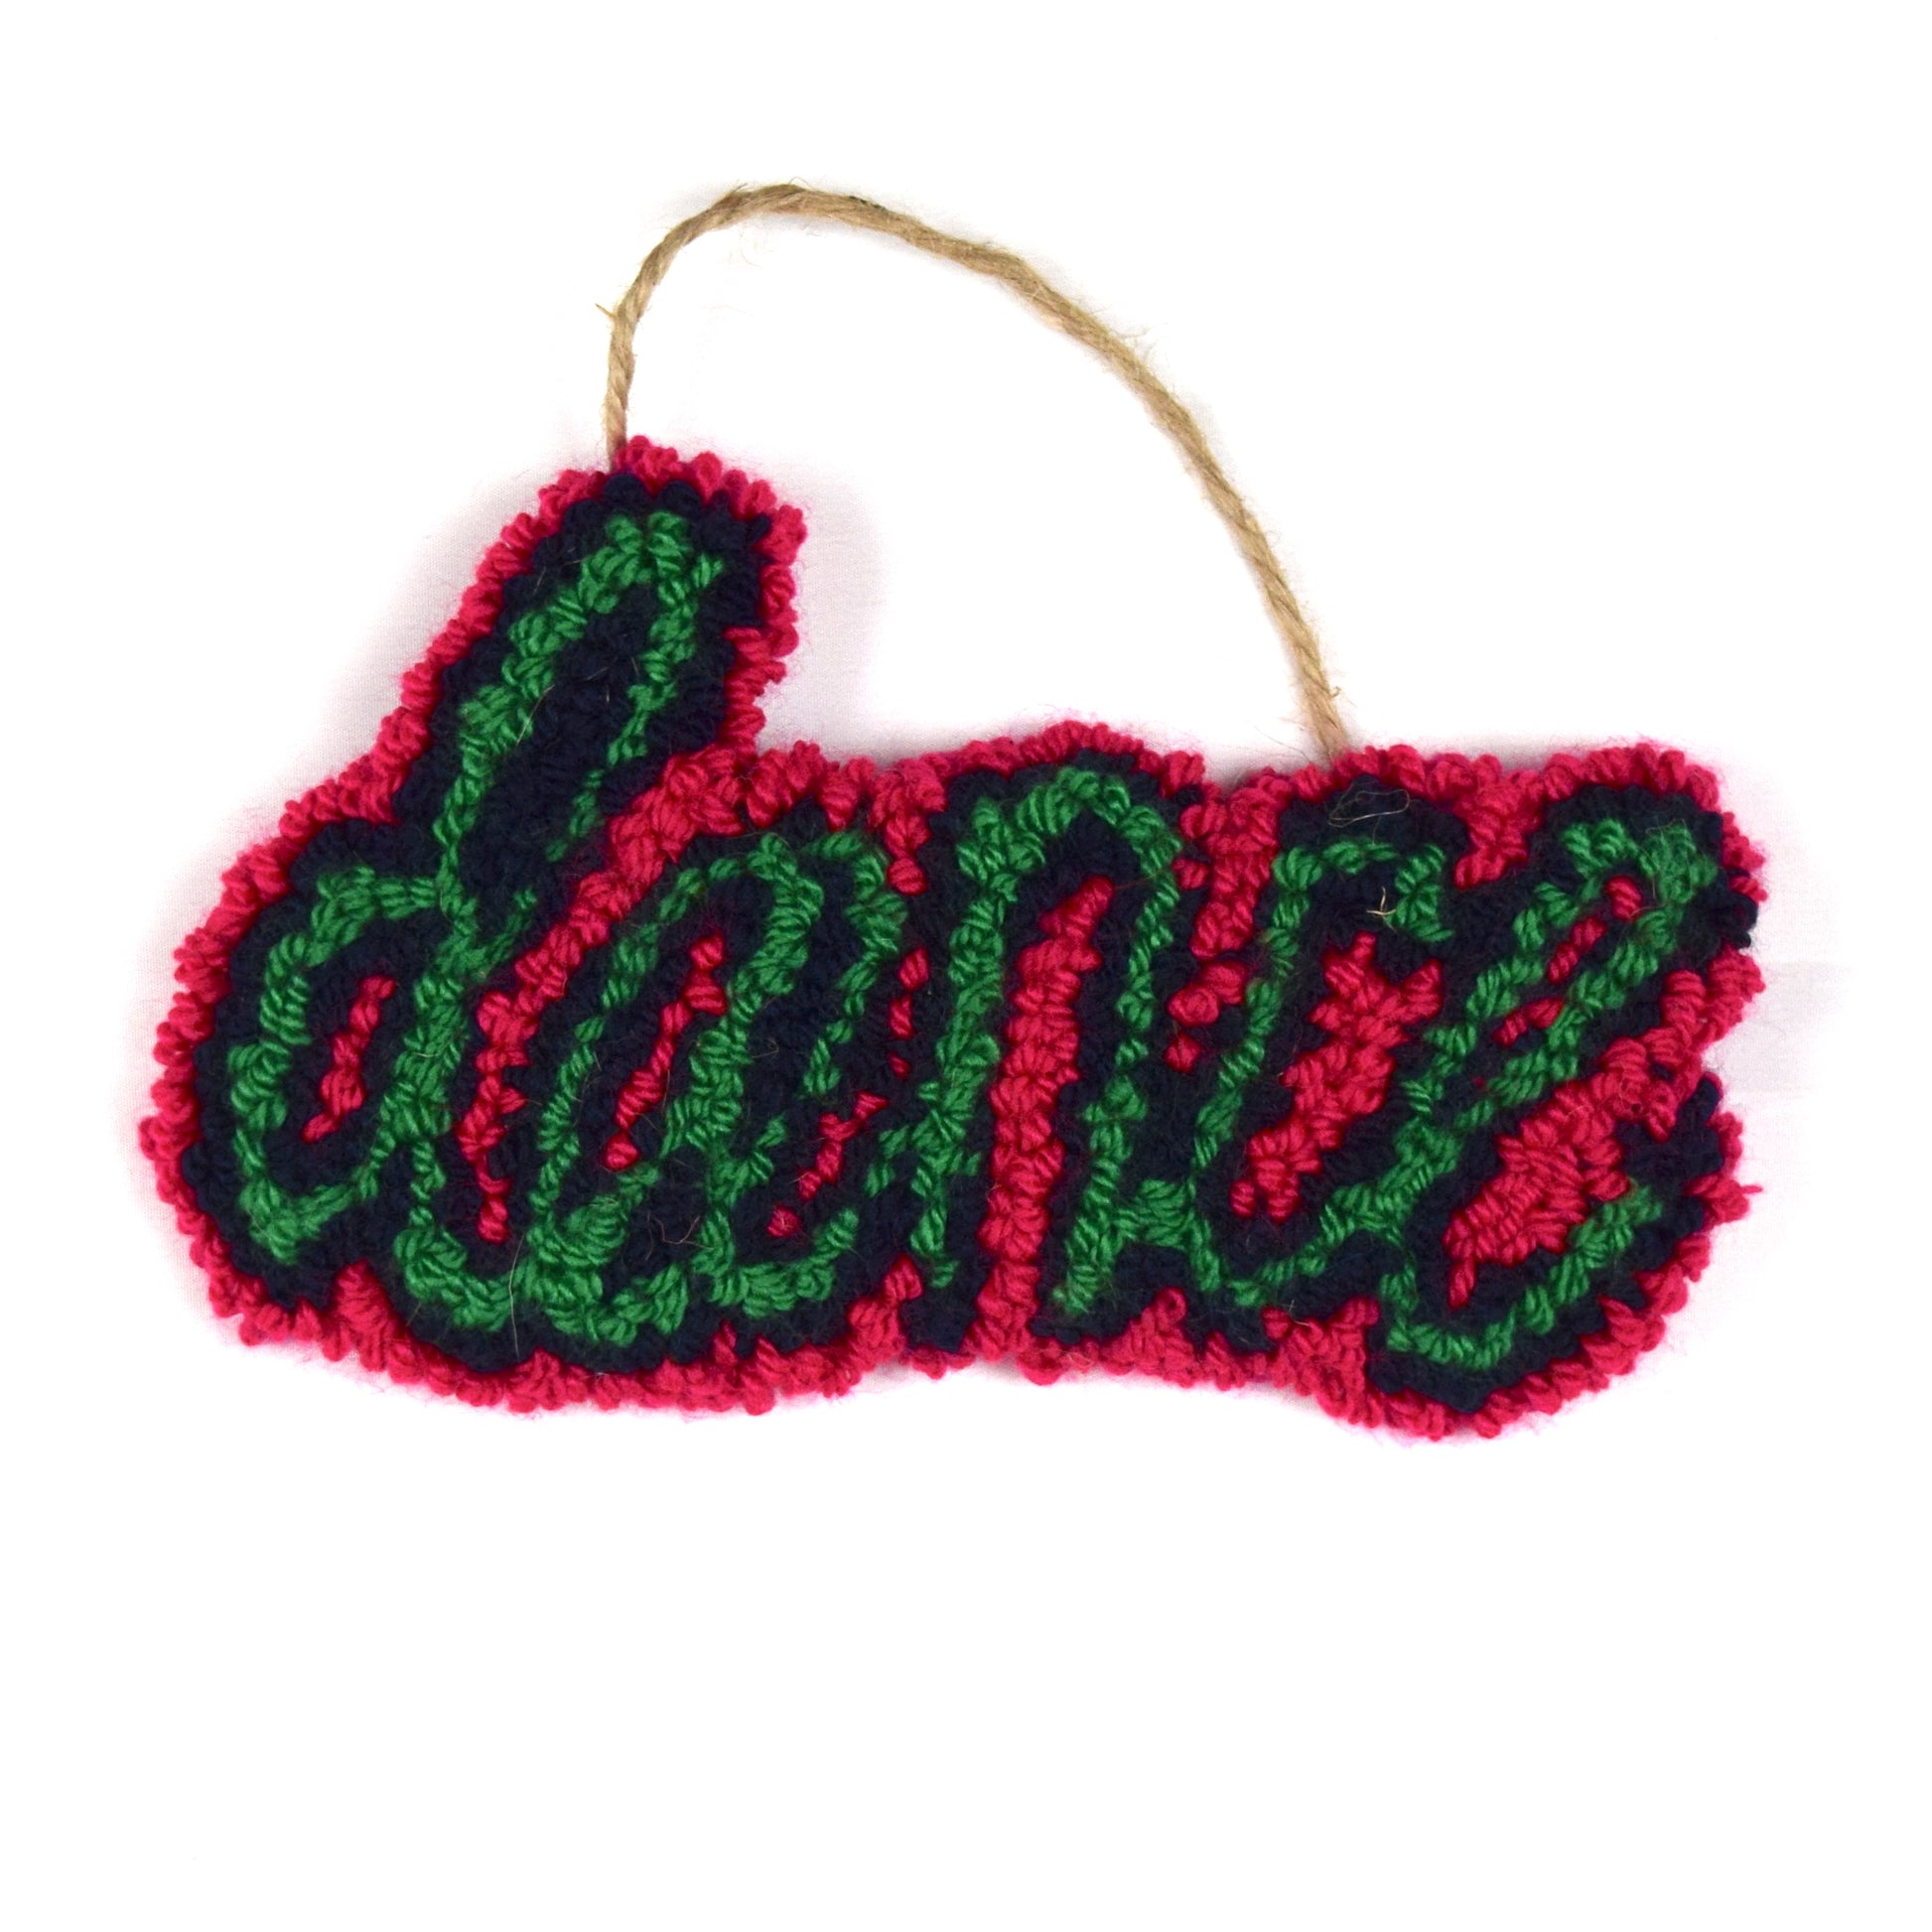 A flowing hand punched DANCE in a slanted shadow text in Neon Pink, Navy and Green using yarn from a previous project. 